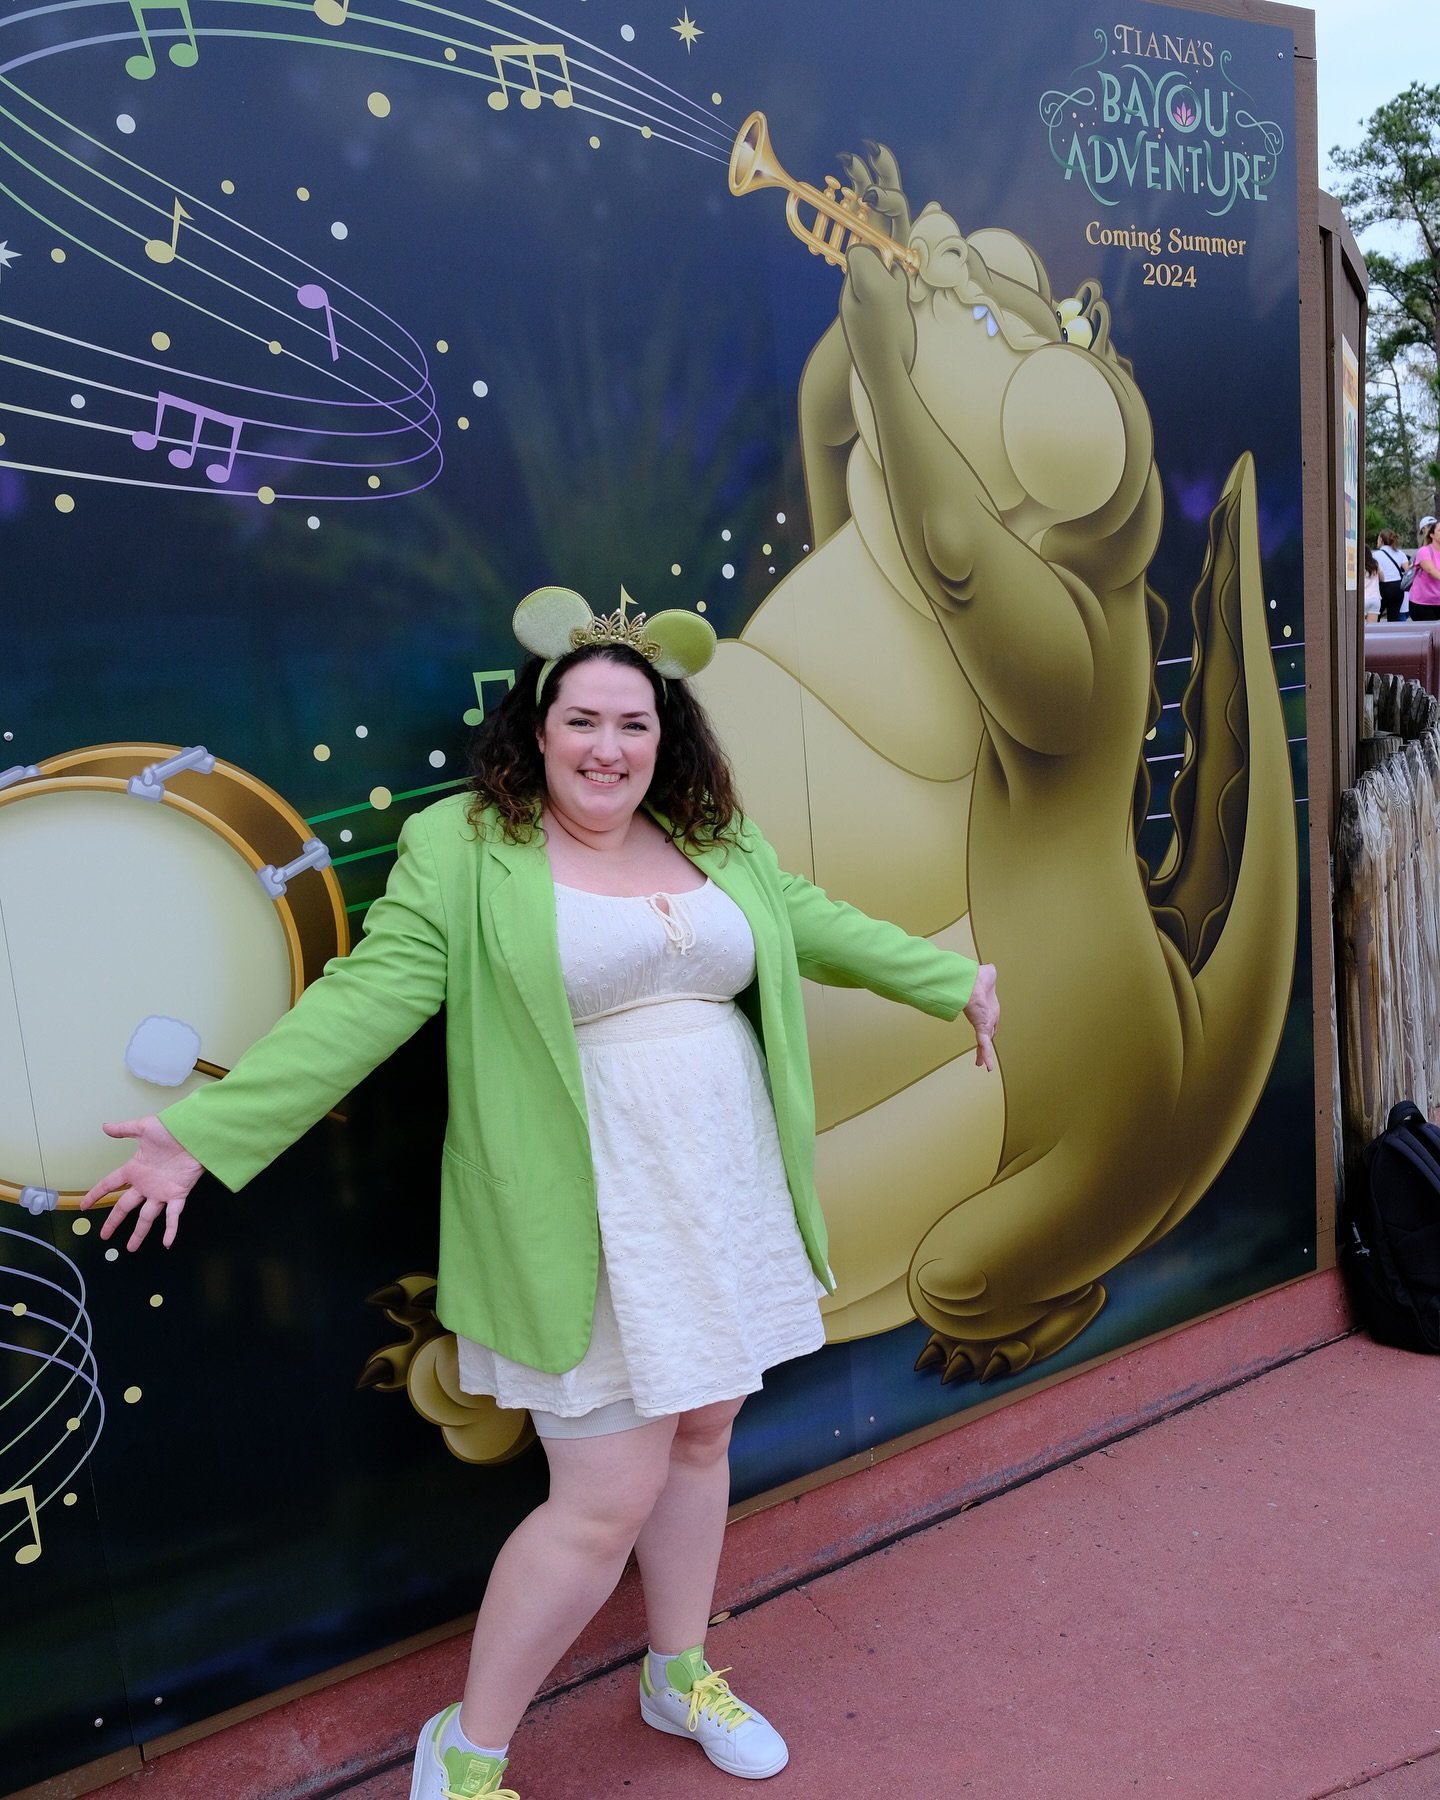 Tiana&rsquo;s Bayou Adventure is opening on June 28th at Walt Disney World!!! Almost there - and we will be there for opening day! I&rsquo;ve been so excited about this ride since the first announcement and I can&rsquo;t wait to finally &ldquo;drop o